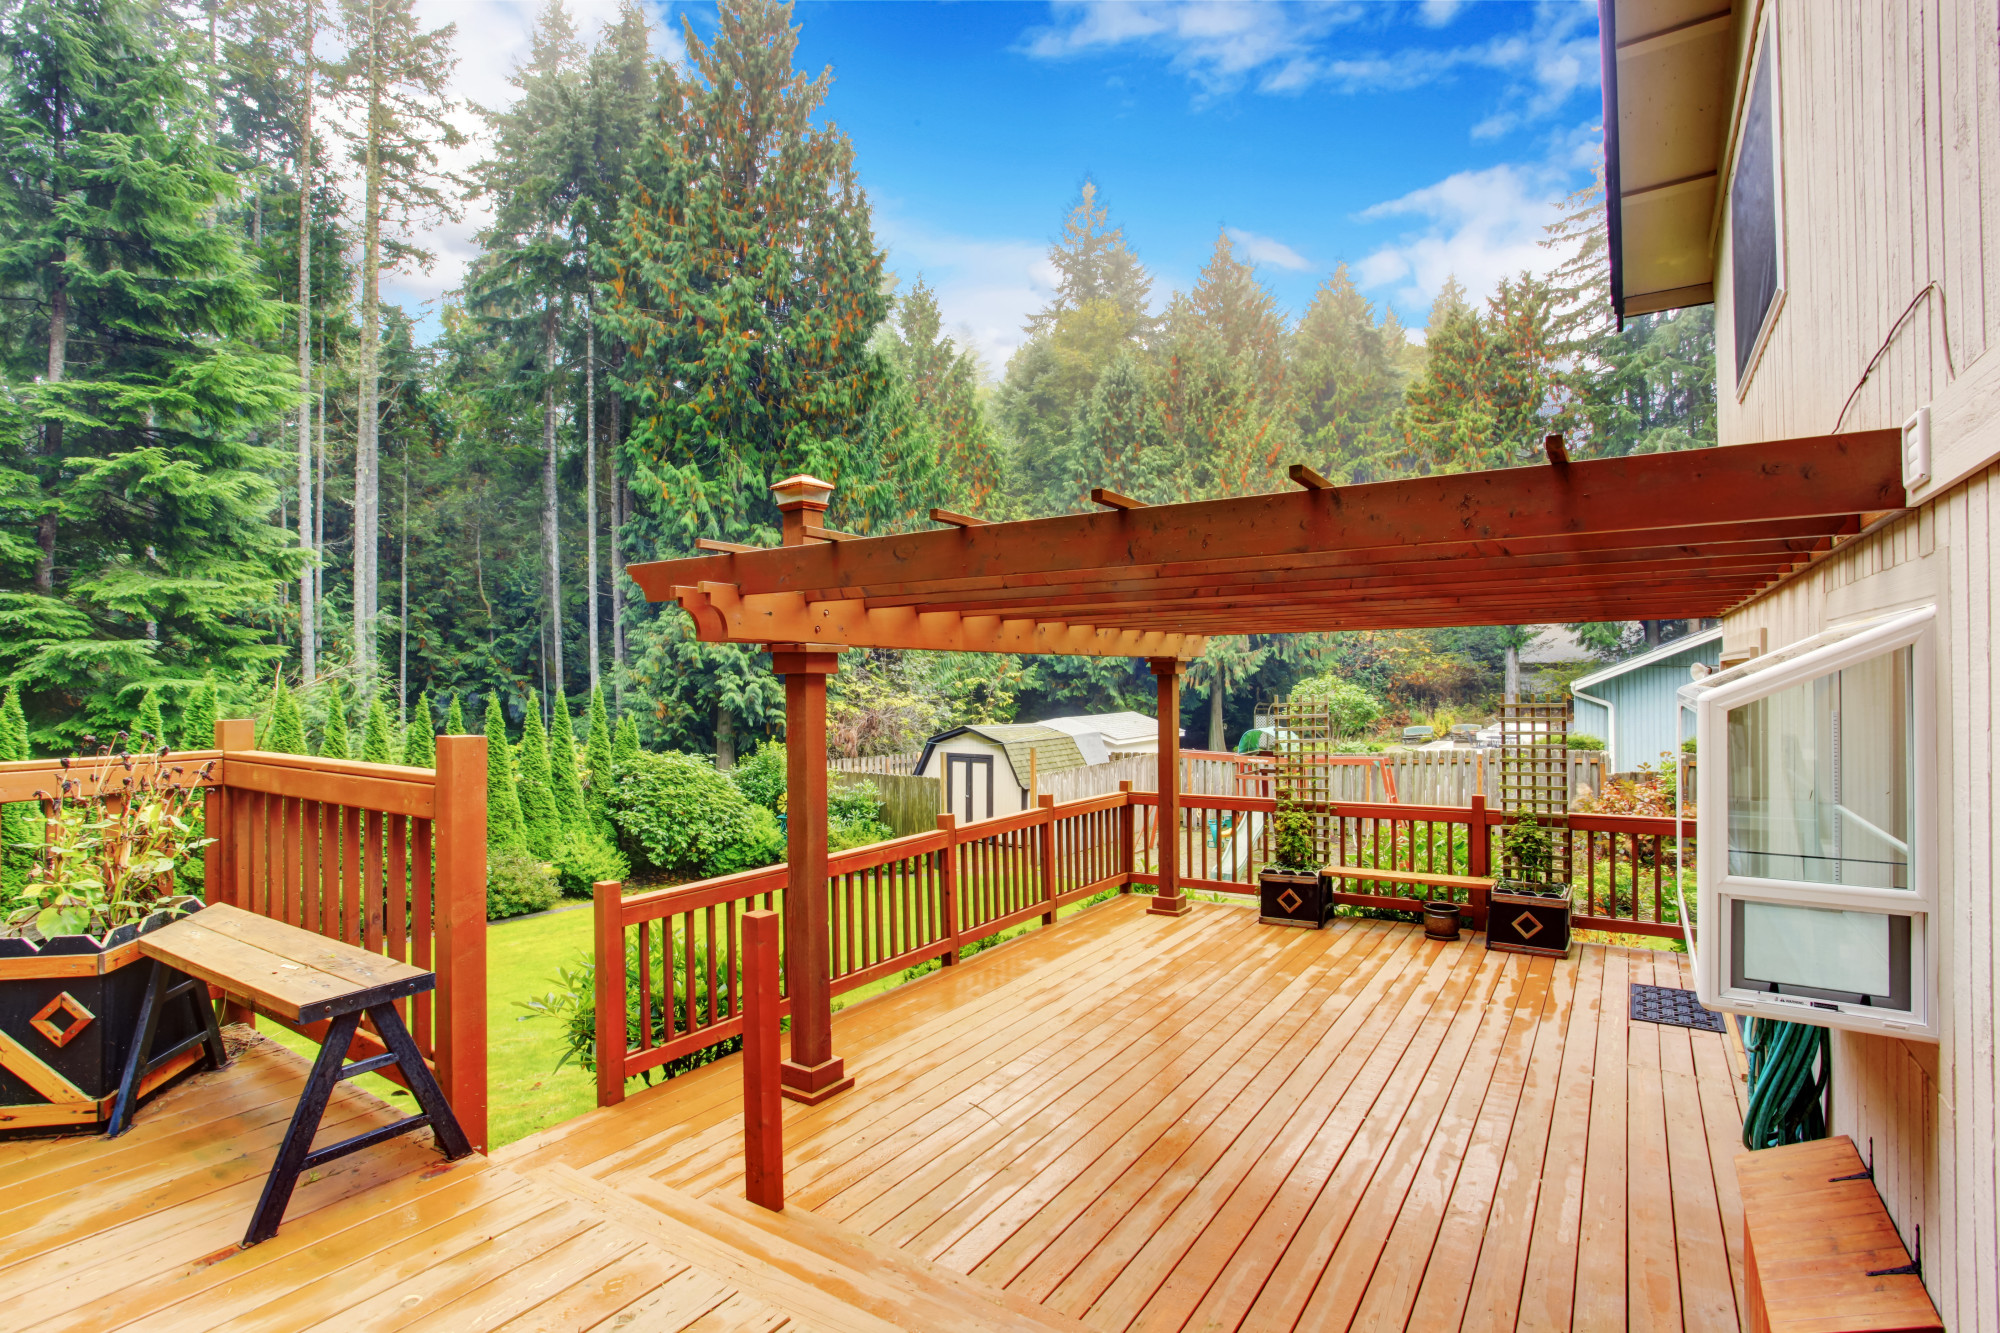 Deck Cleaning: The Best Ways to Care for Your Wooden Decking